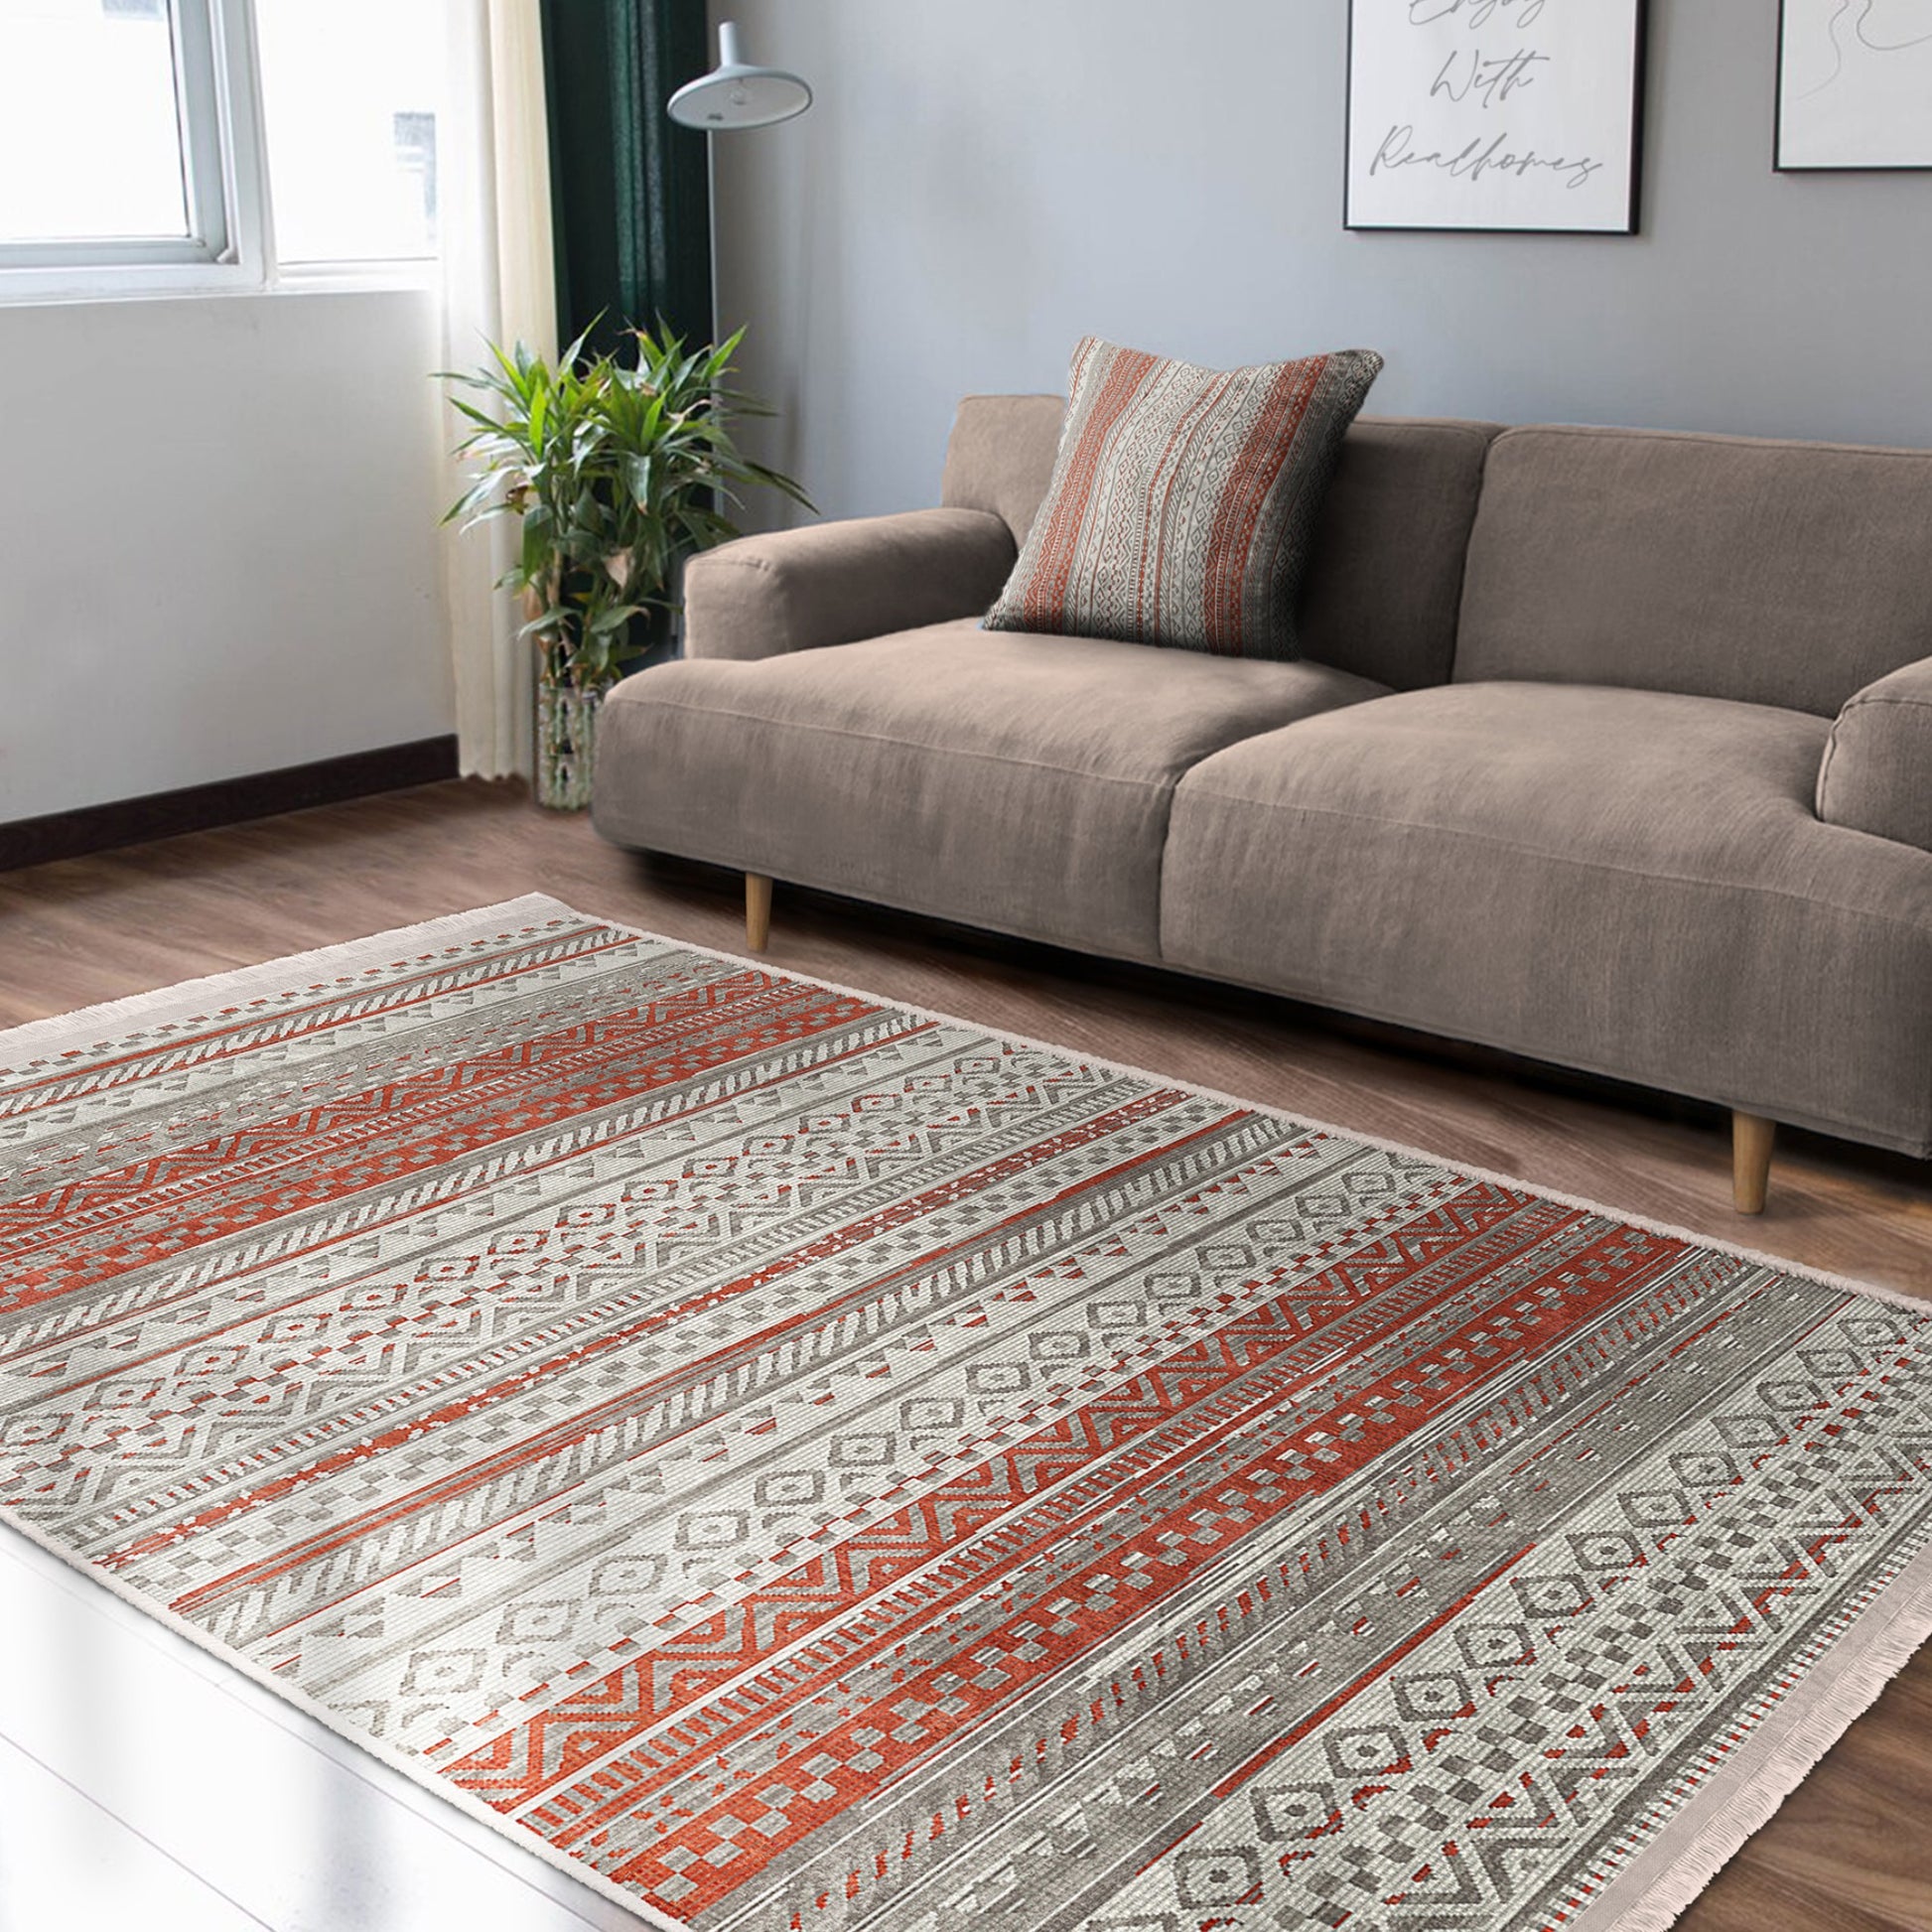 Moroccan Patterned Area Rug for a Touch of Heritage Elegance